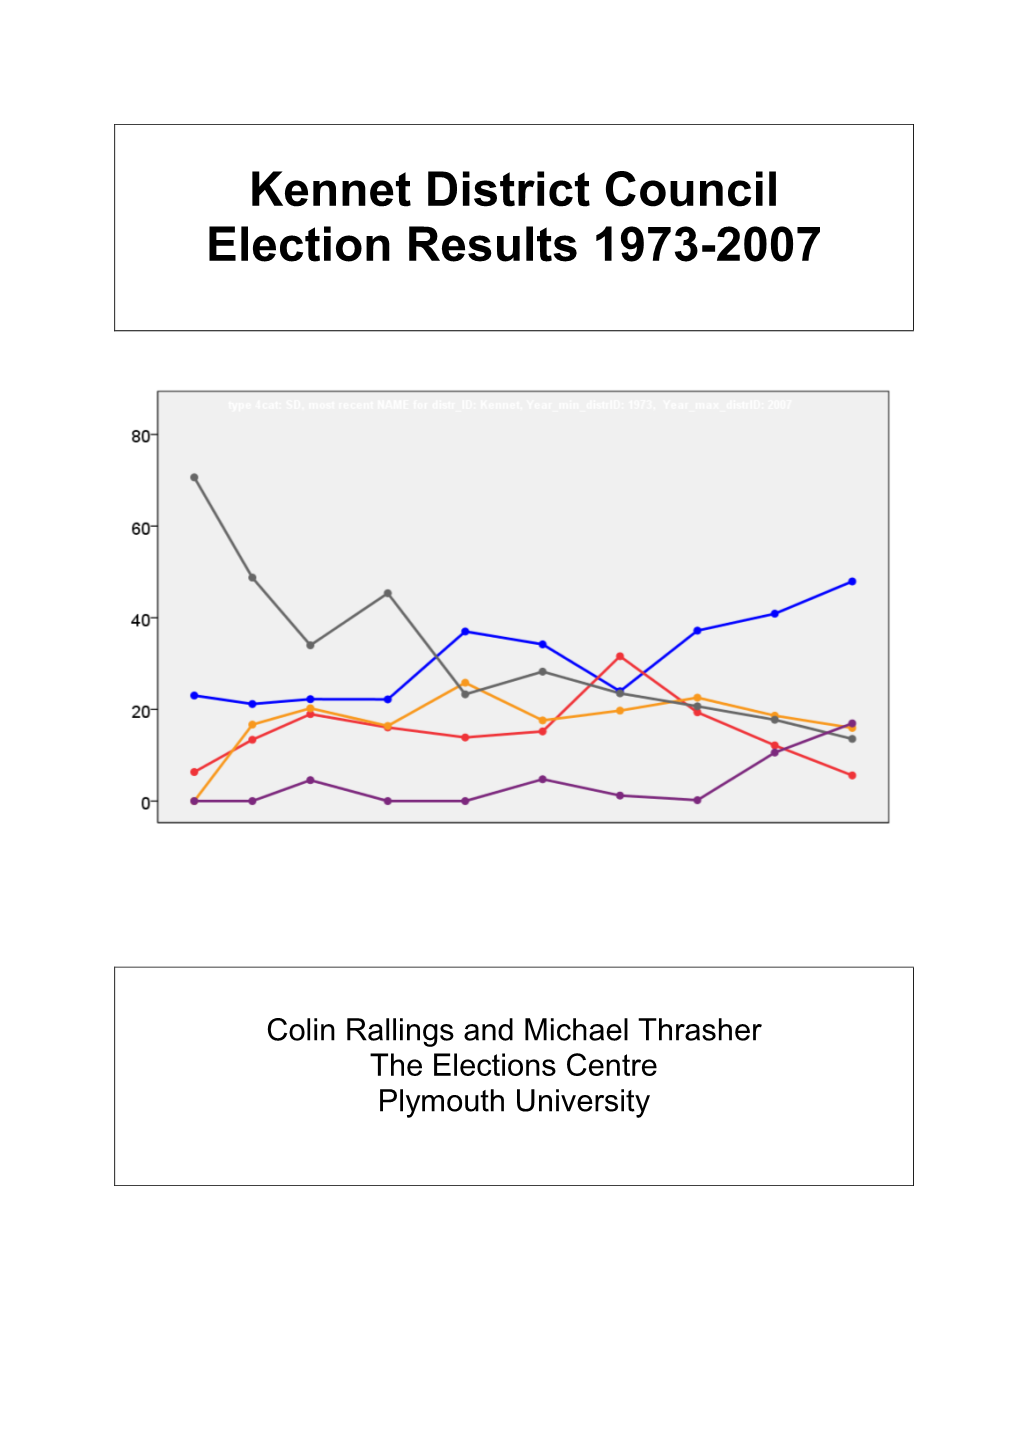 Kennet District Council Election Results 1973-2007